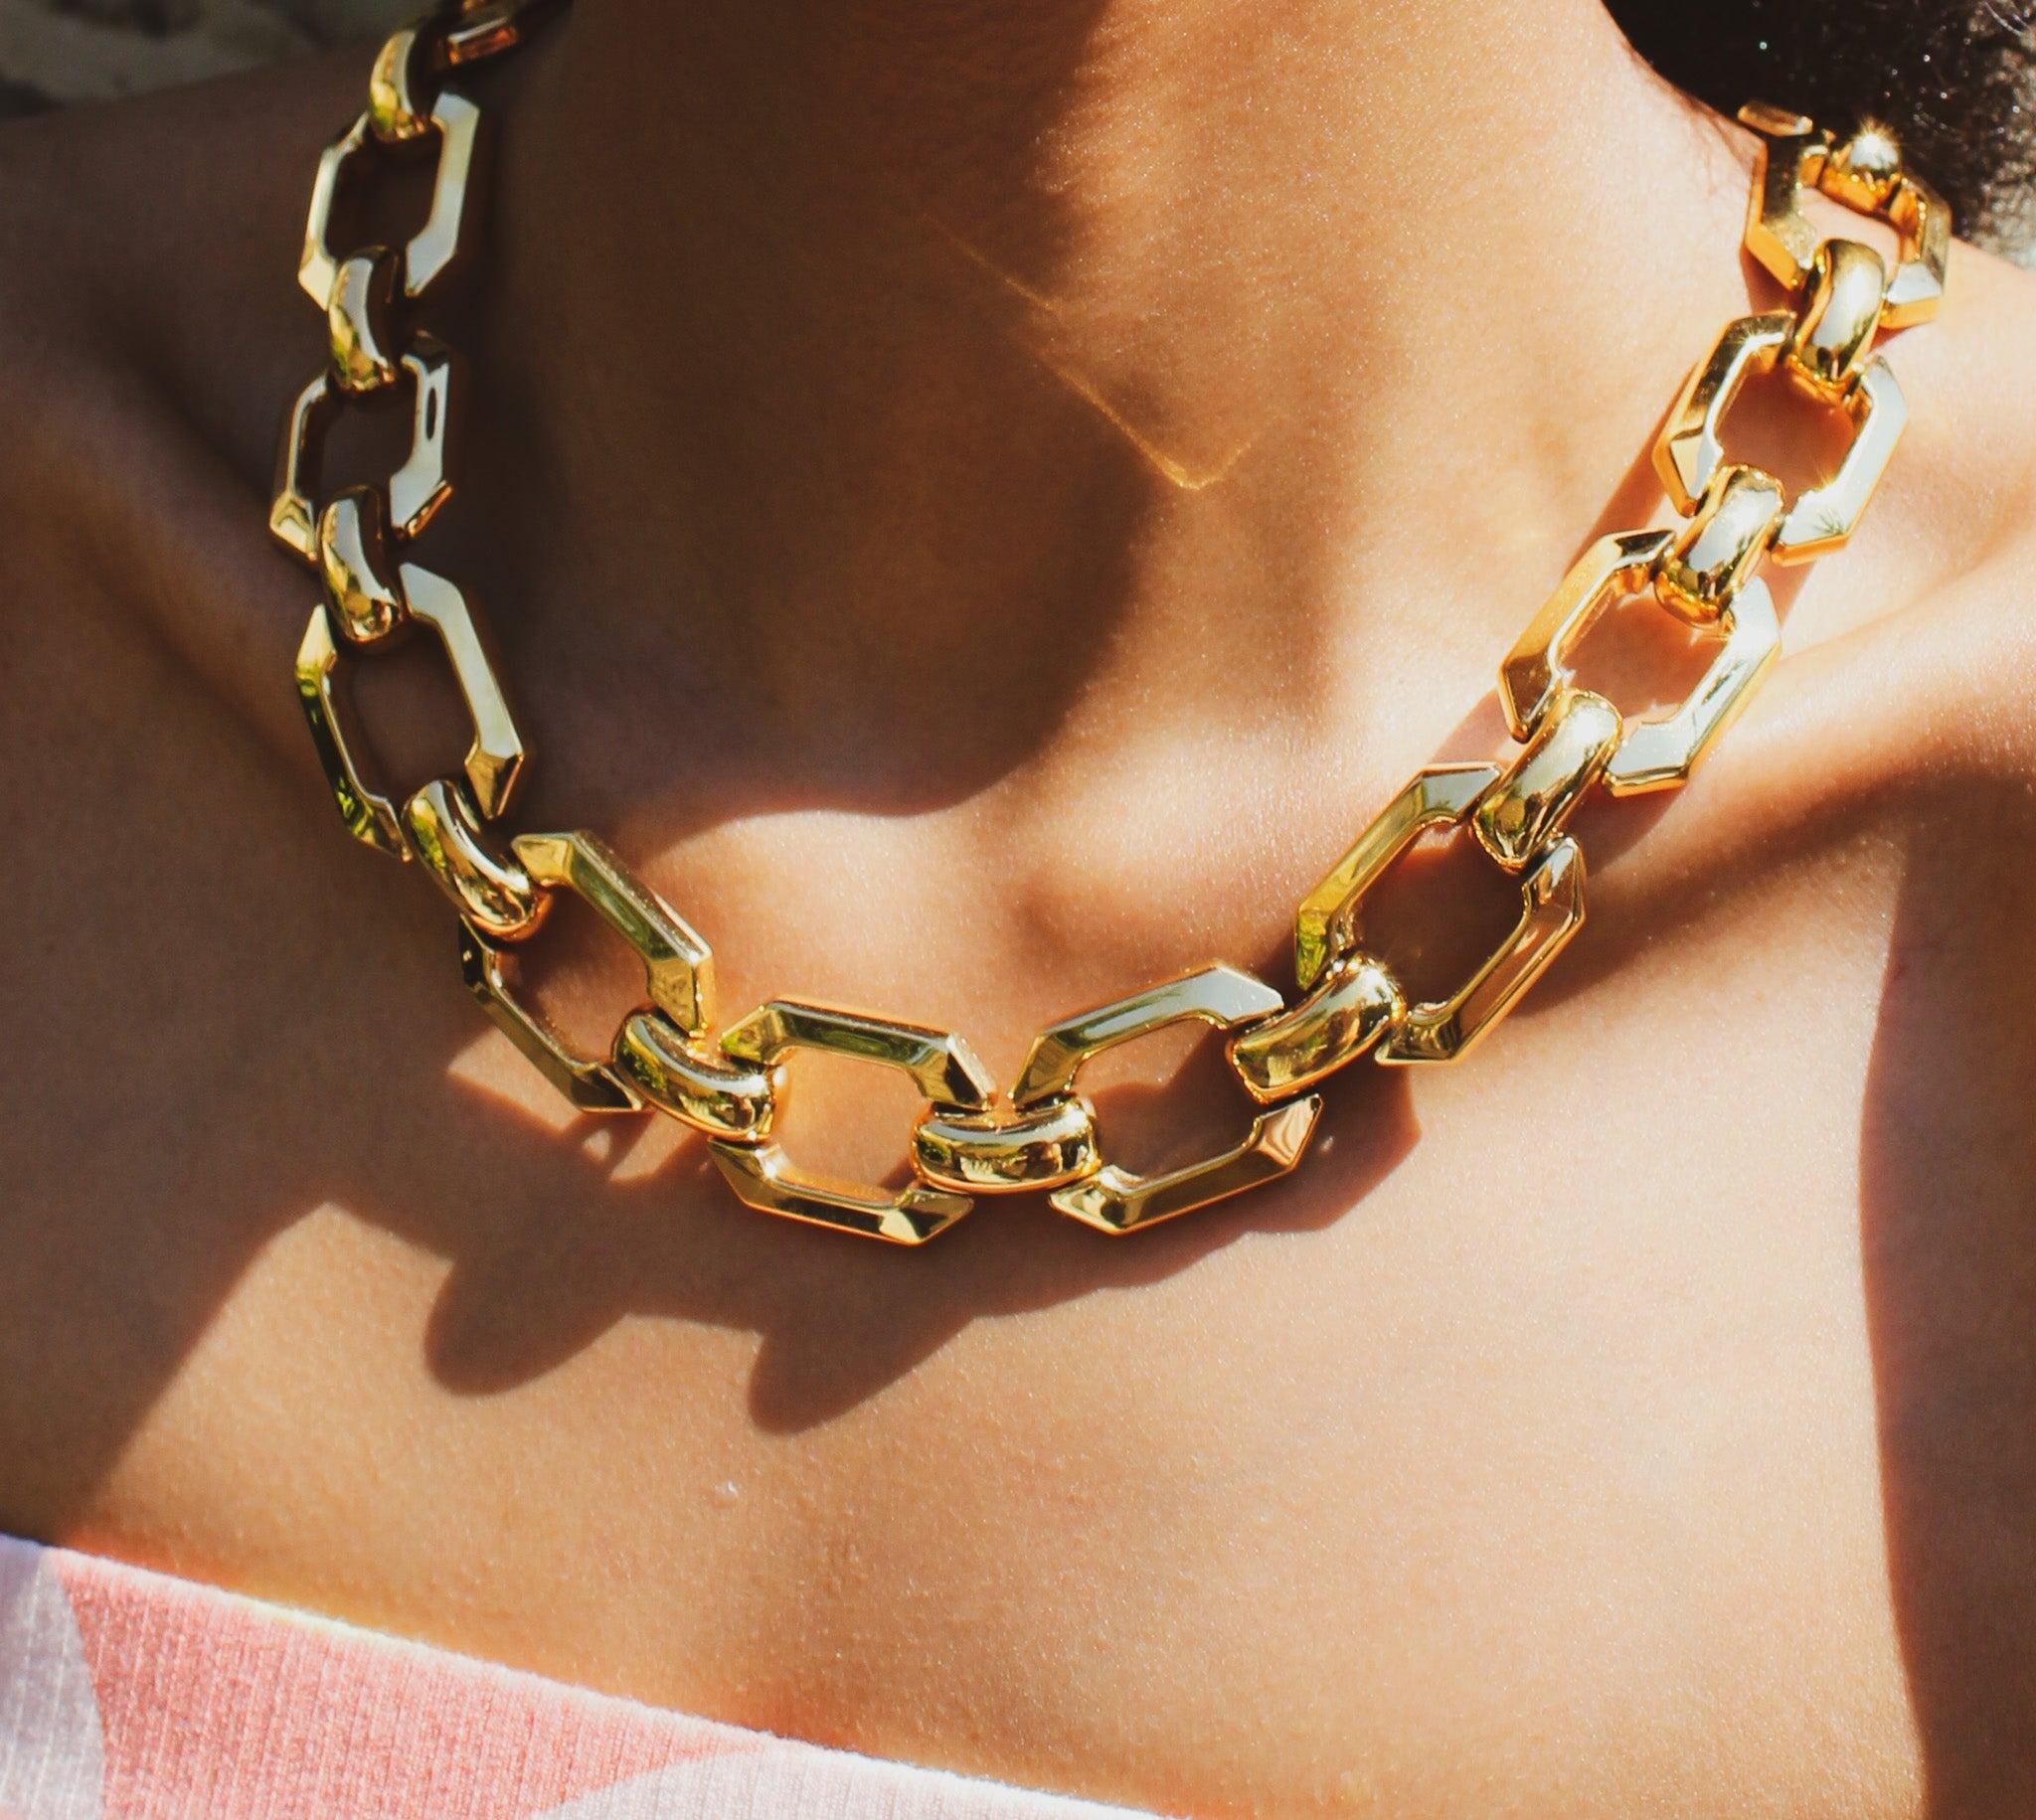 A super cool chunky collar link necklace from the one of the world's most desirable designers - sure to elevate any outfit. Crafted in Germany in the early 80s, this incredible necklace is cast from high quality gold plated metal hexagon links,